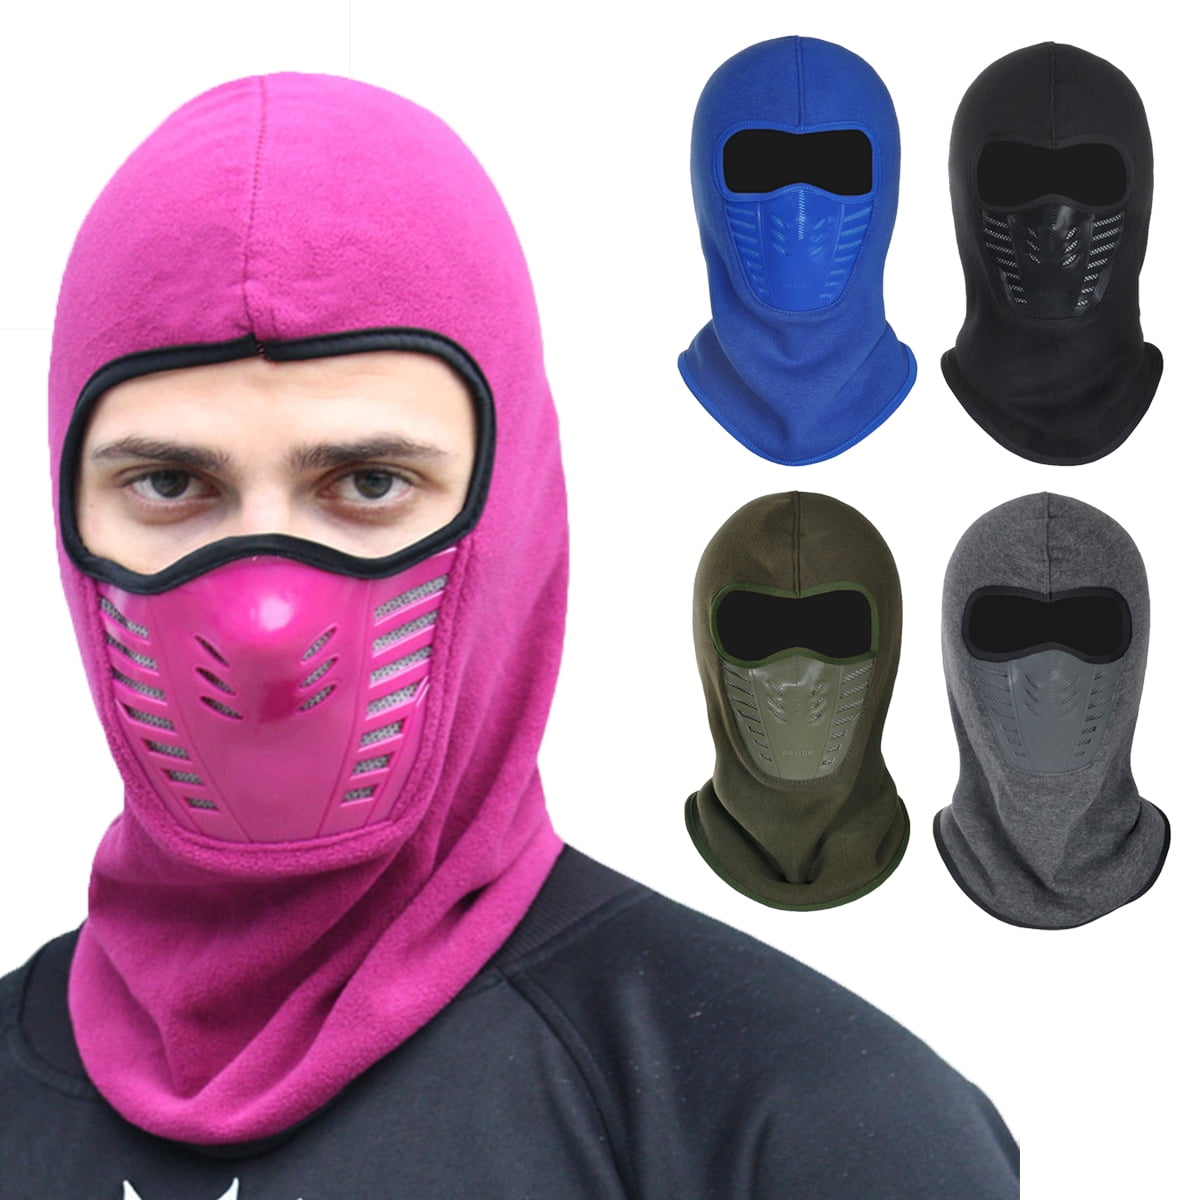  Tuyimm United States Army Veteran Face Mask Balaclavas  Adjustable Comfortable Washable Reusable Breathable for Adult Men Women  with 10 Filters, 13 Piece Set : Clothing, Shoes & Jewelry